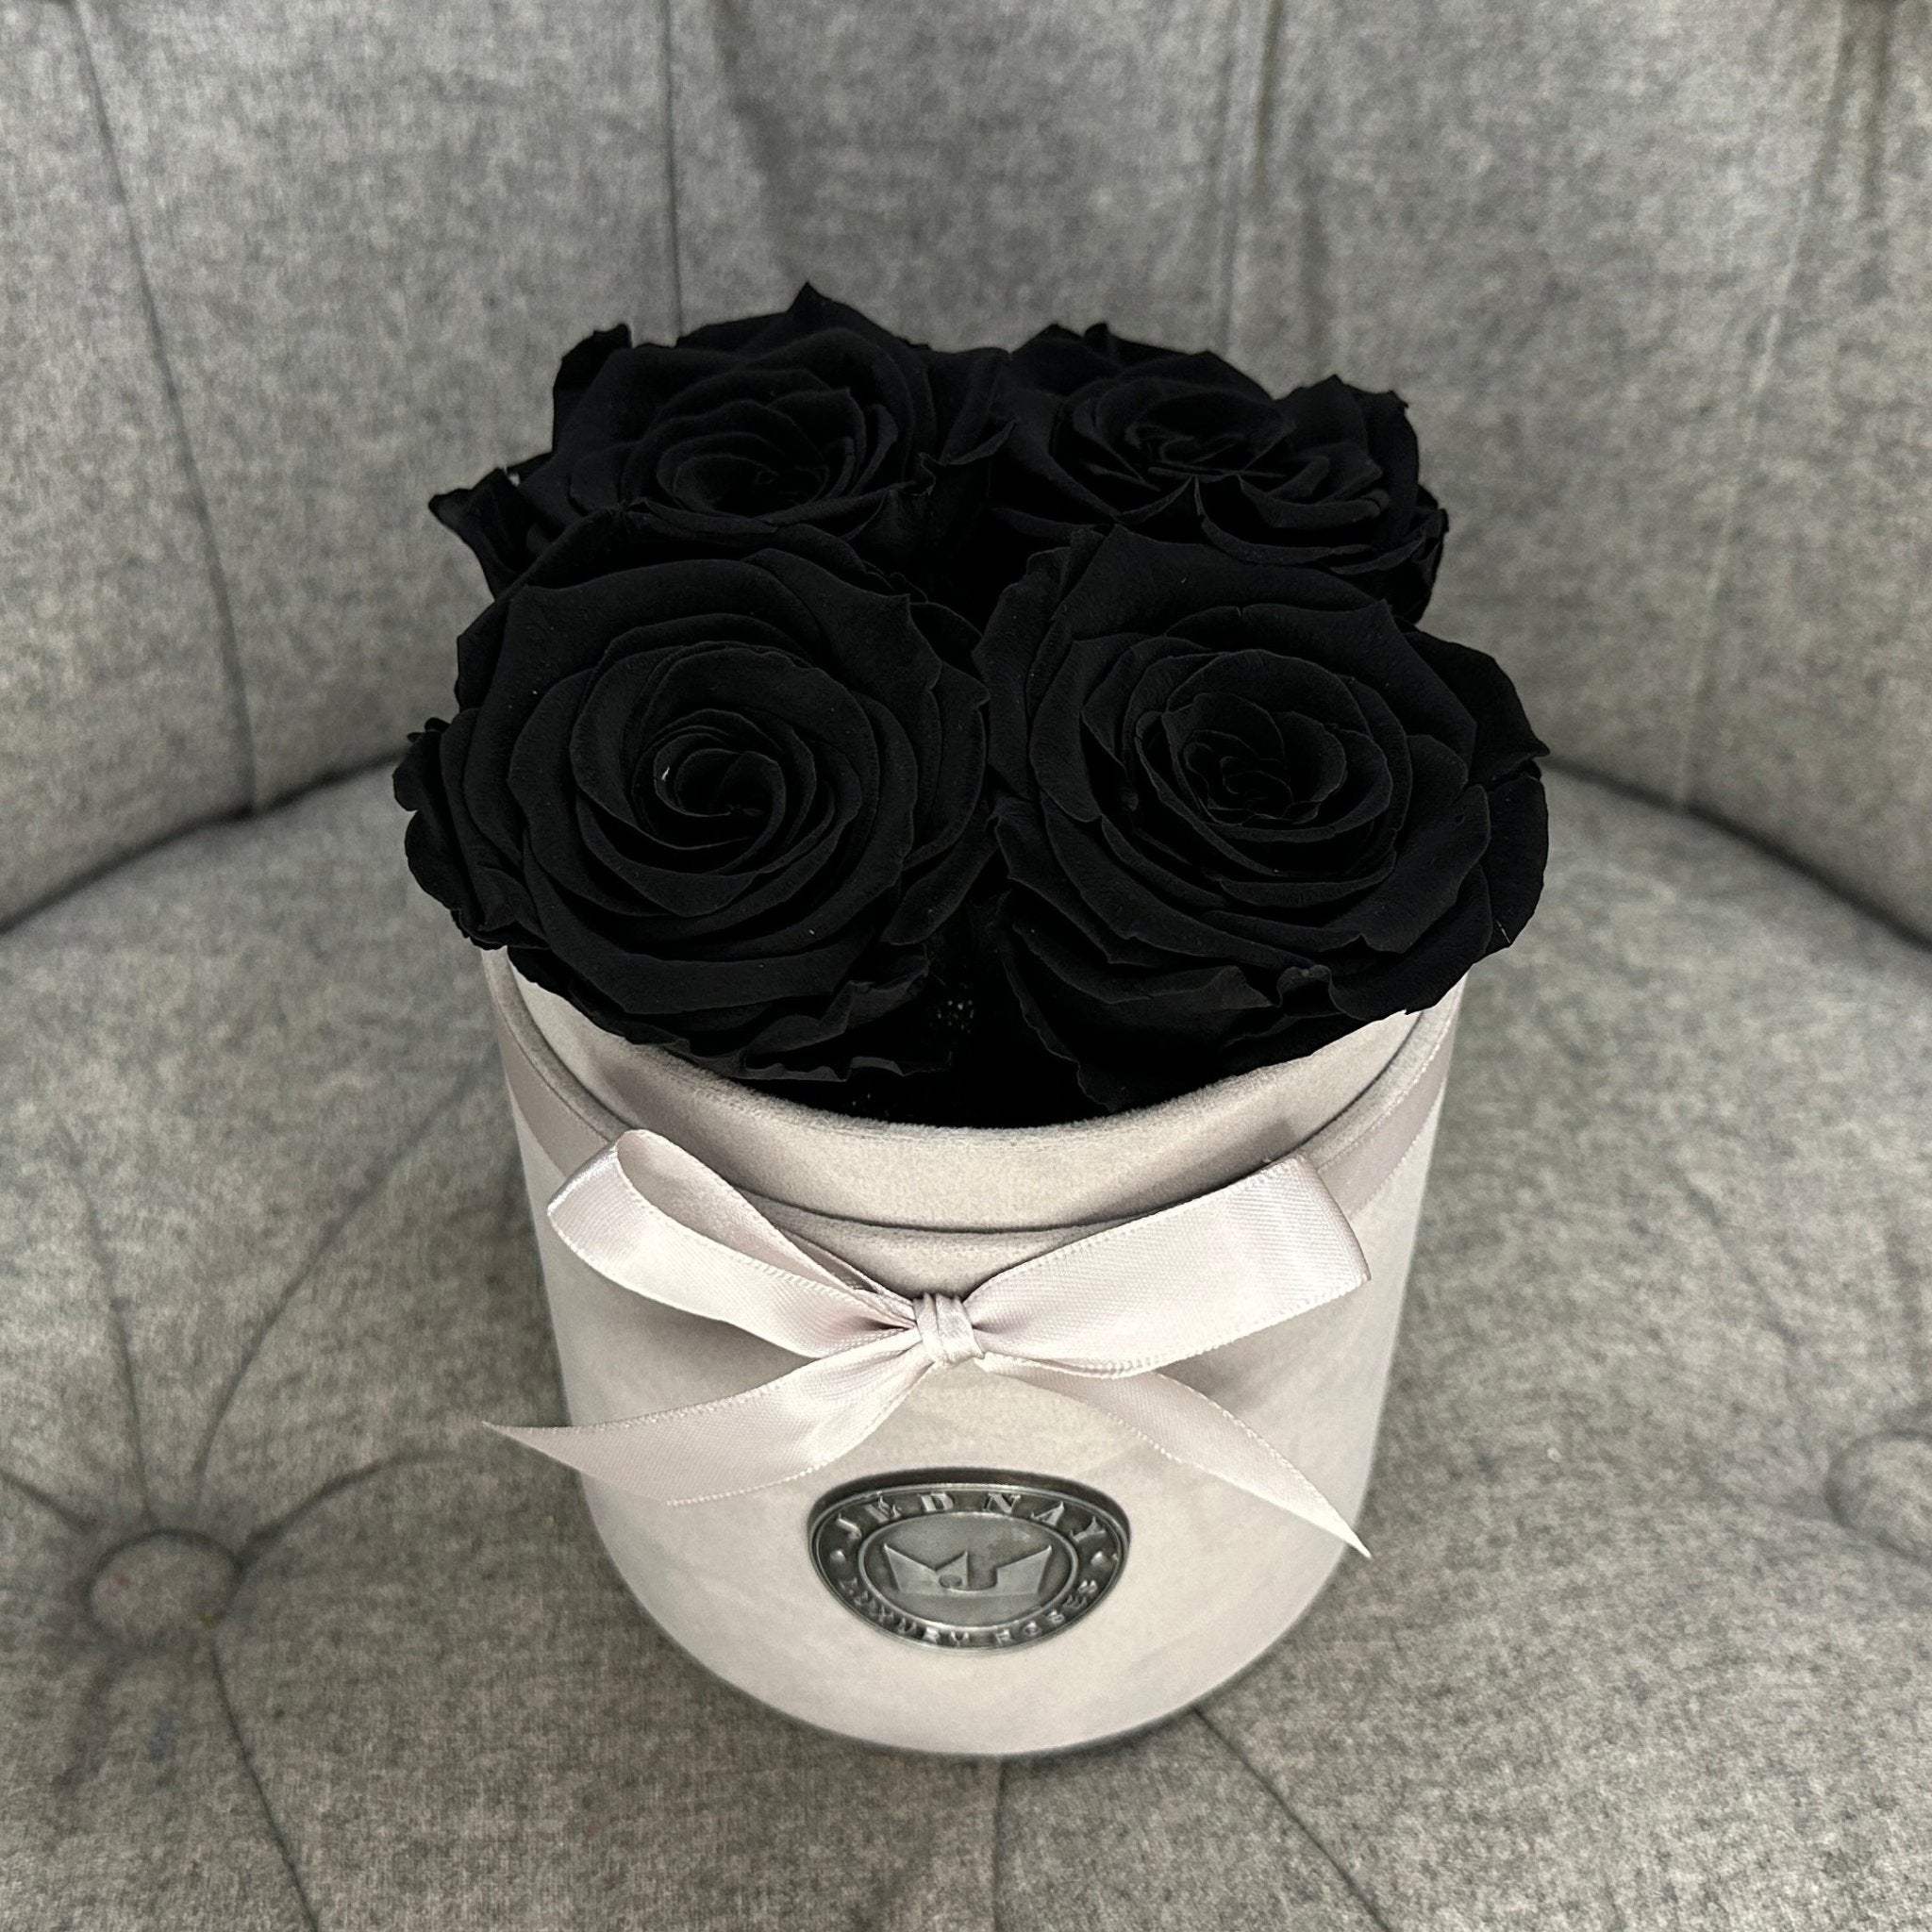 Petite Grey Suede Forever Rose Box - Midnight Black Eternal Roses - Jednay Roses